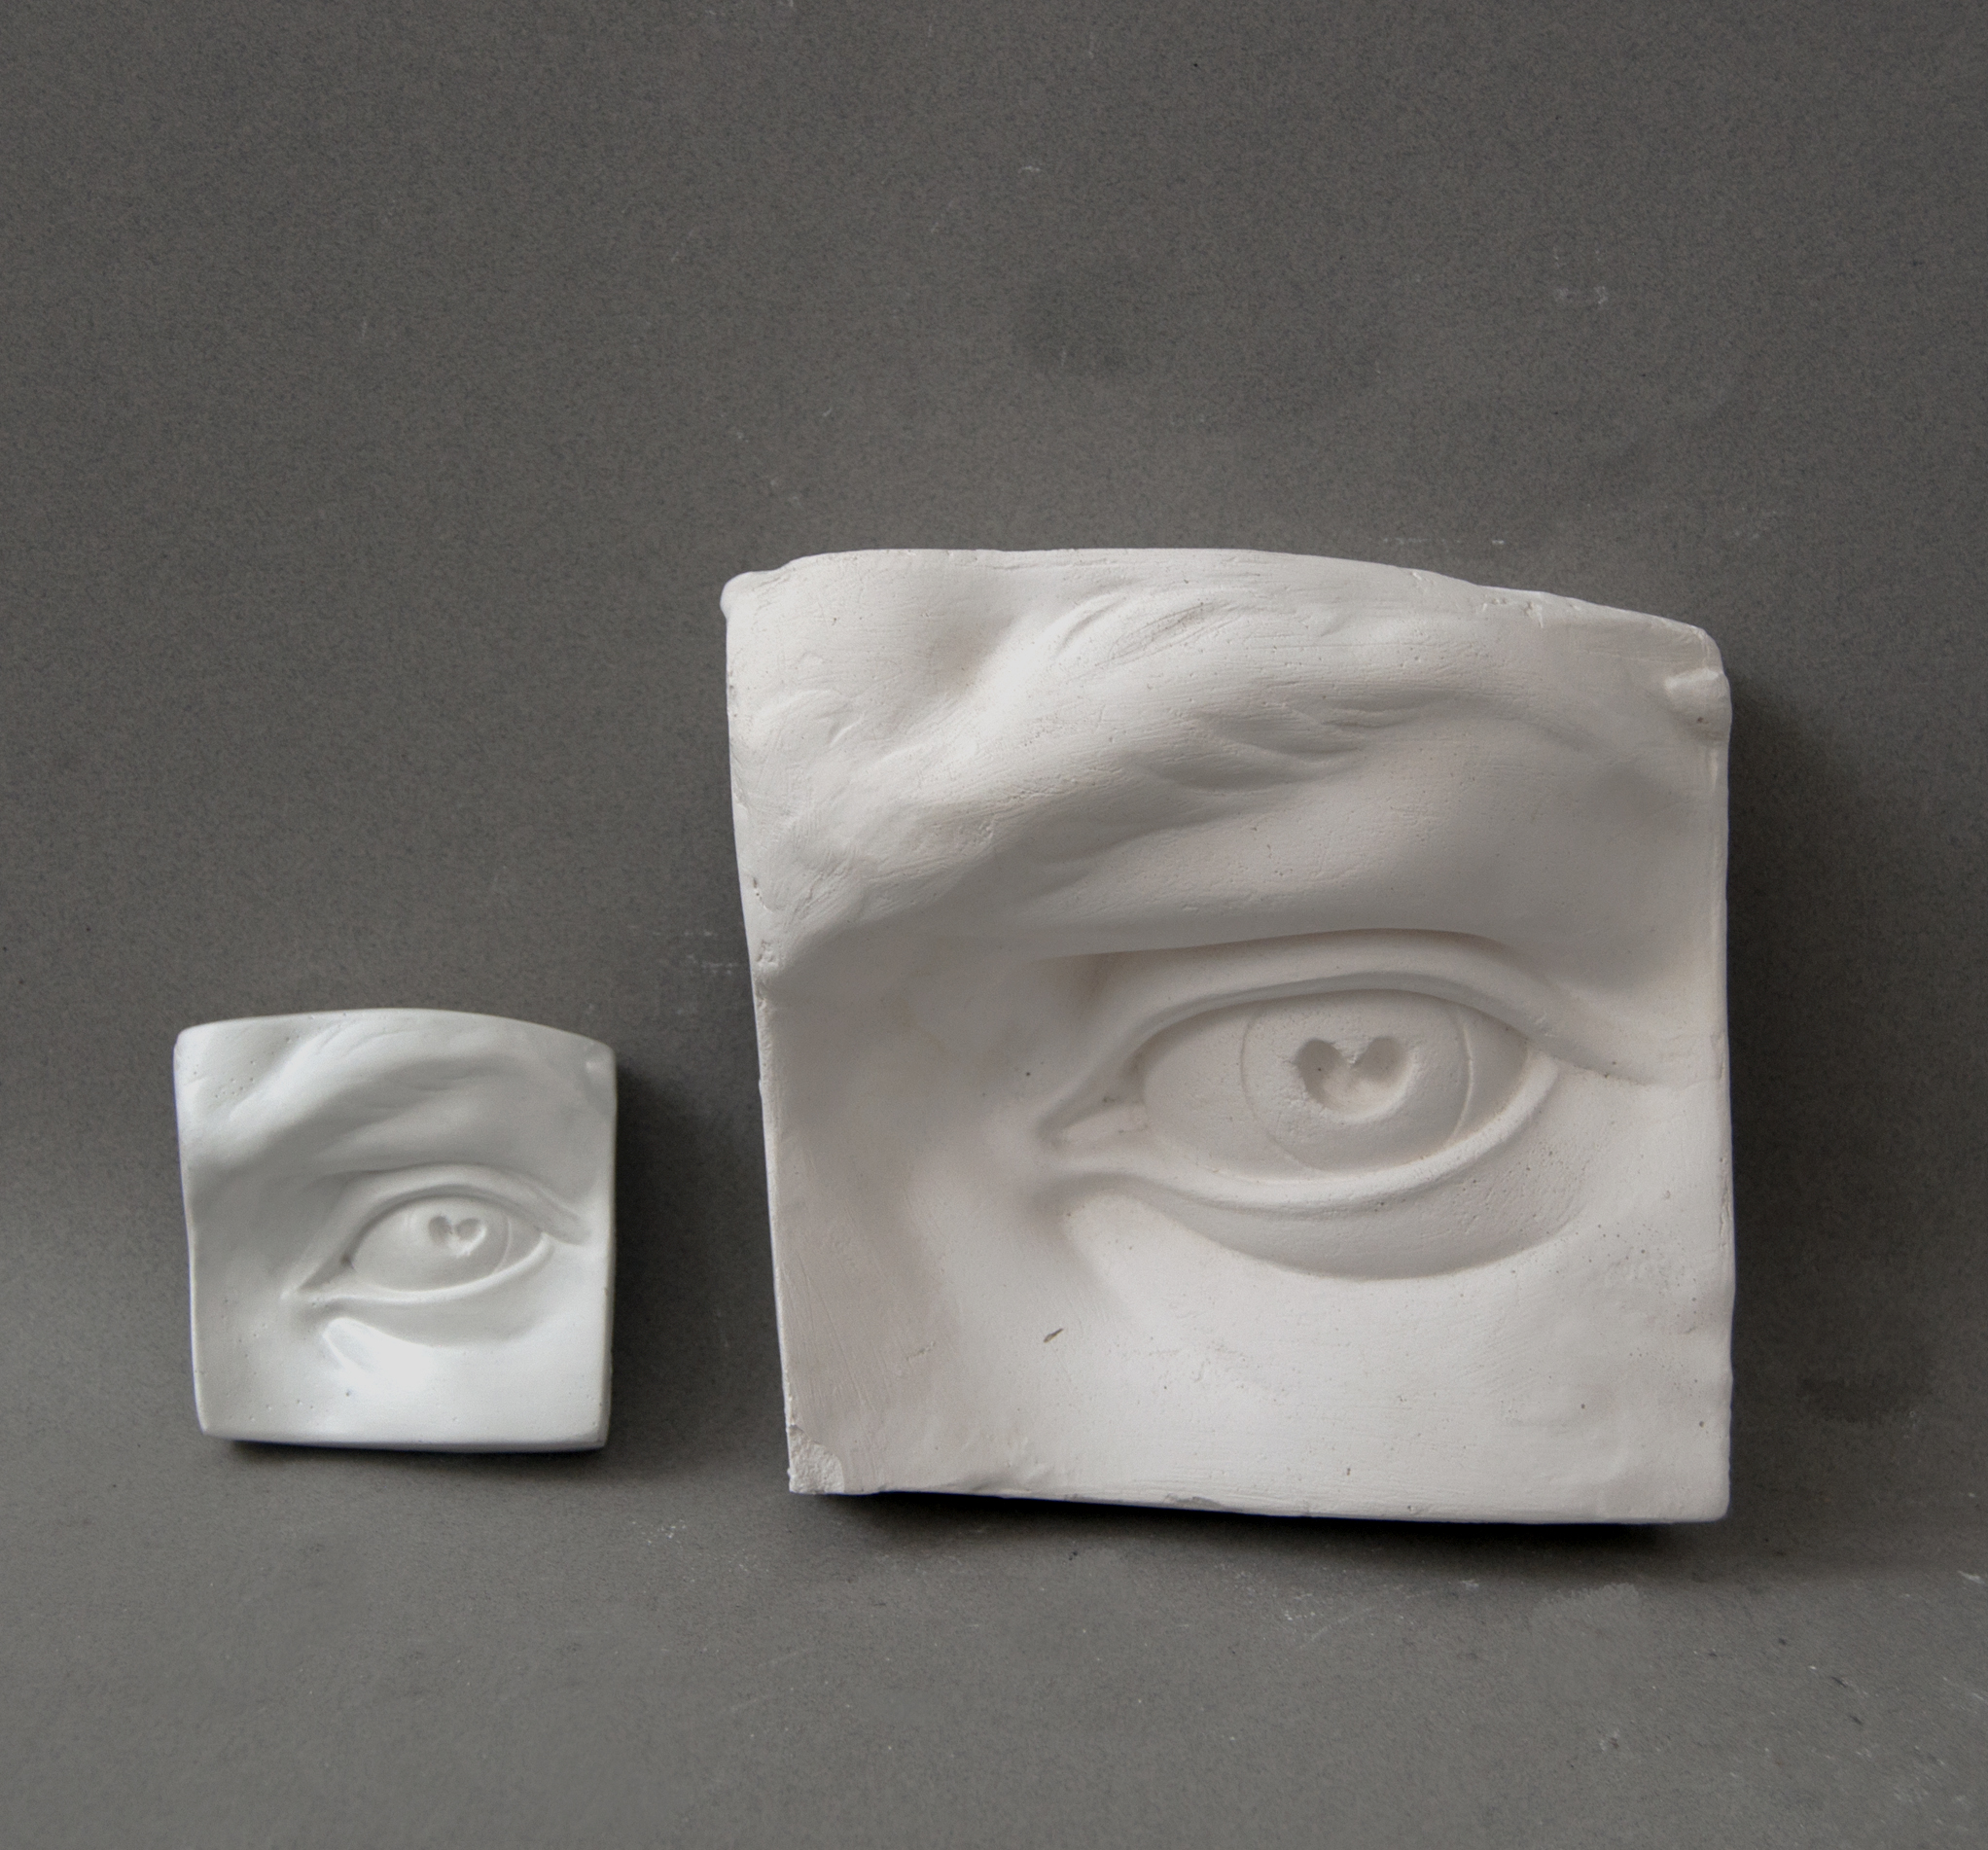 Comparison of the small and big plaster cast of Michelangelos David eye, from the front, used in traditional drawing courses